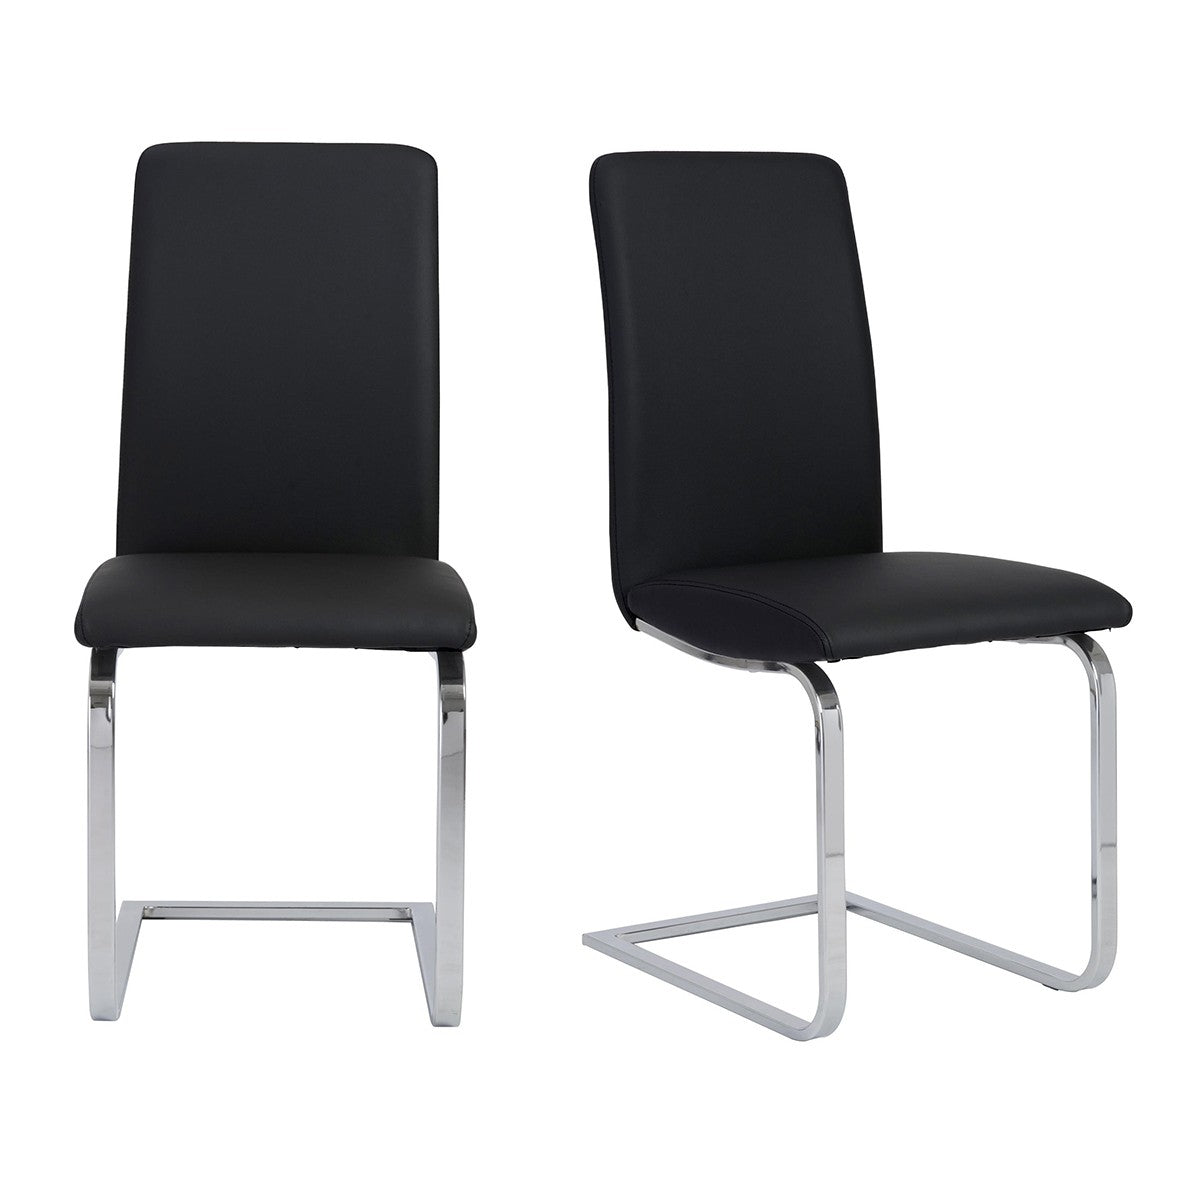 Set of Two Mod Black and Silver Dining Chairs